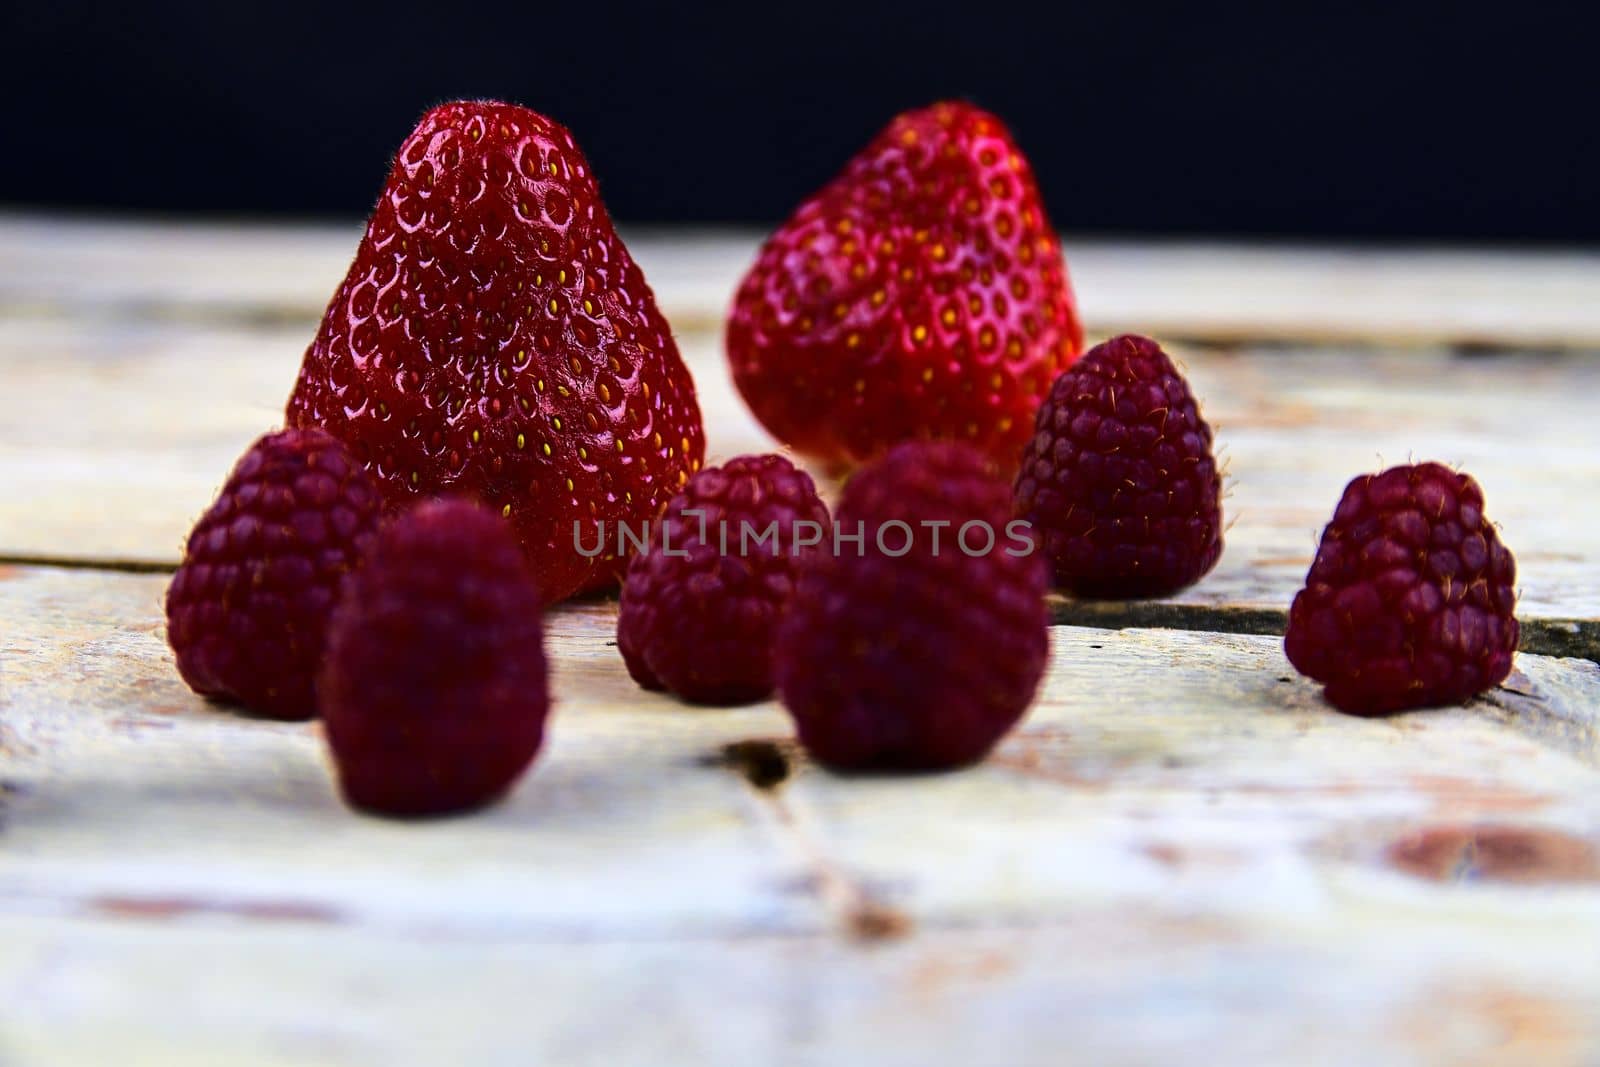 Strawberries and raspberries on rustic white wooden background. White and black background. Dark image by roman_nerud